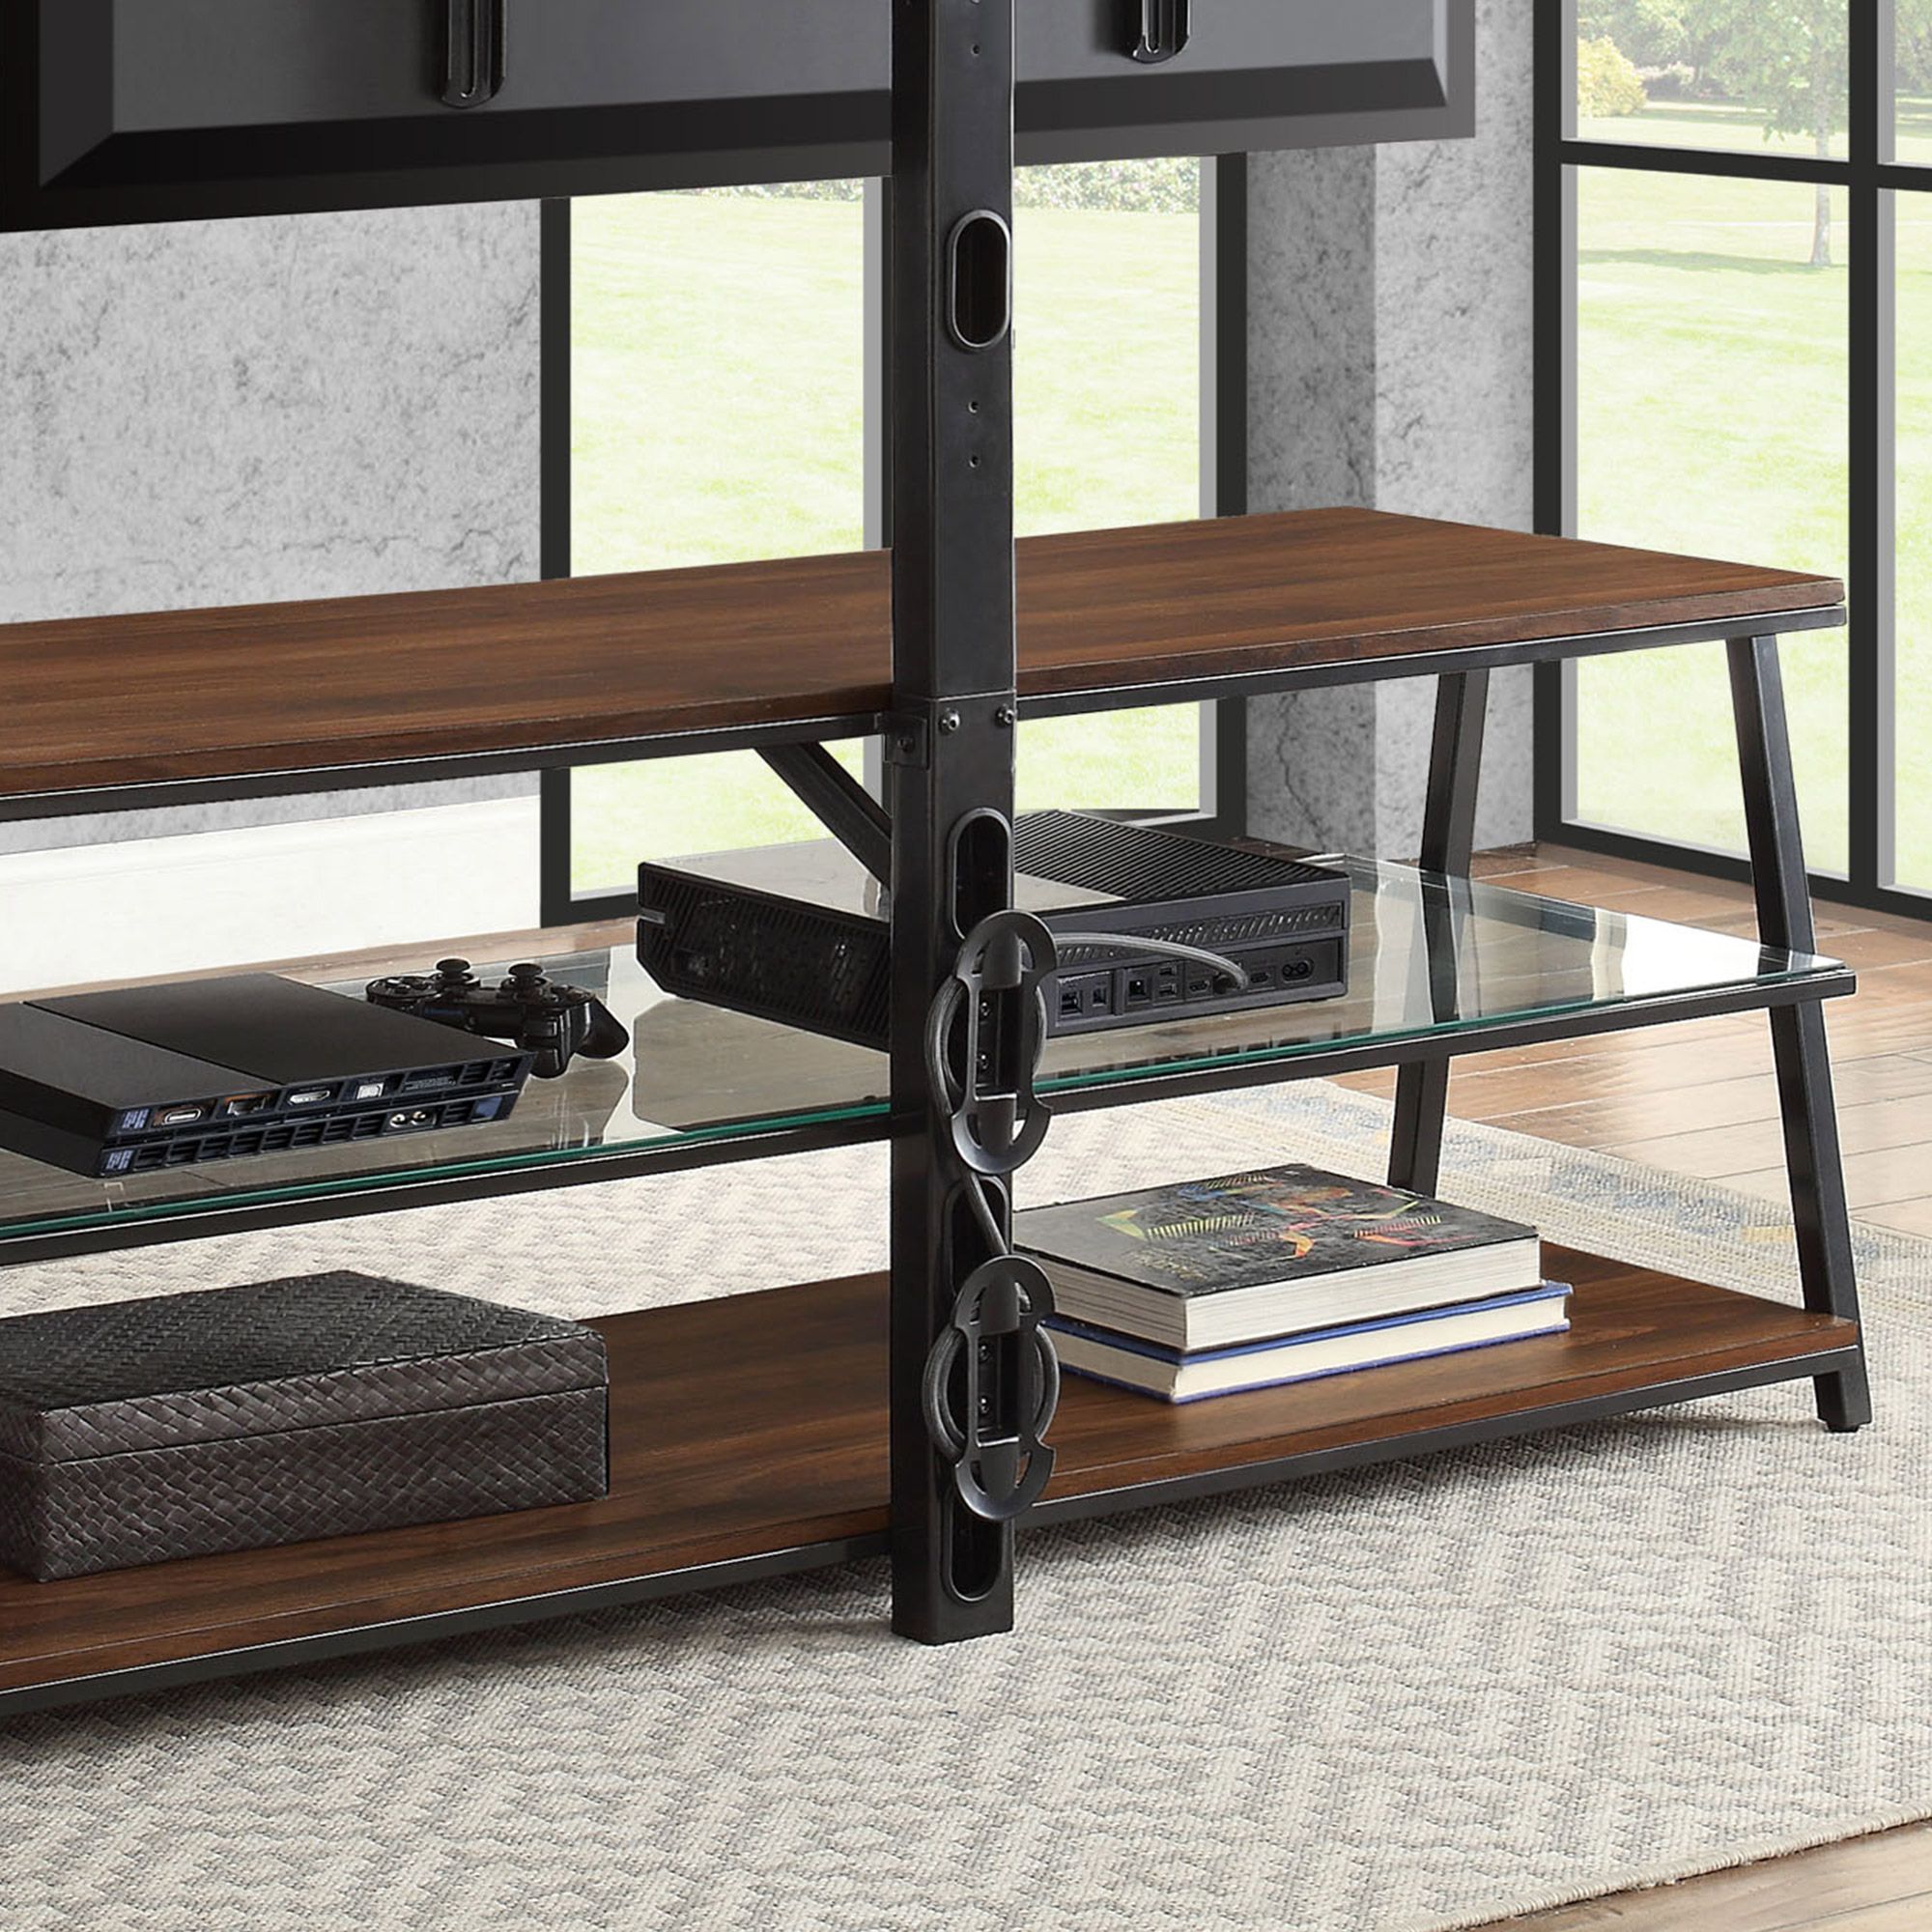 Mainstays Arris 3 In 1 Tv Stand For Televisions Up To 70 For Mainstays Arris 3 In 1 Tv Stands In Canyon Walnut Finish (View 11 of 20)